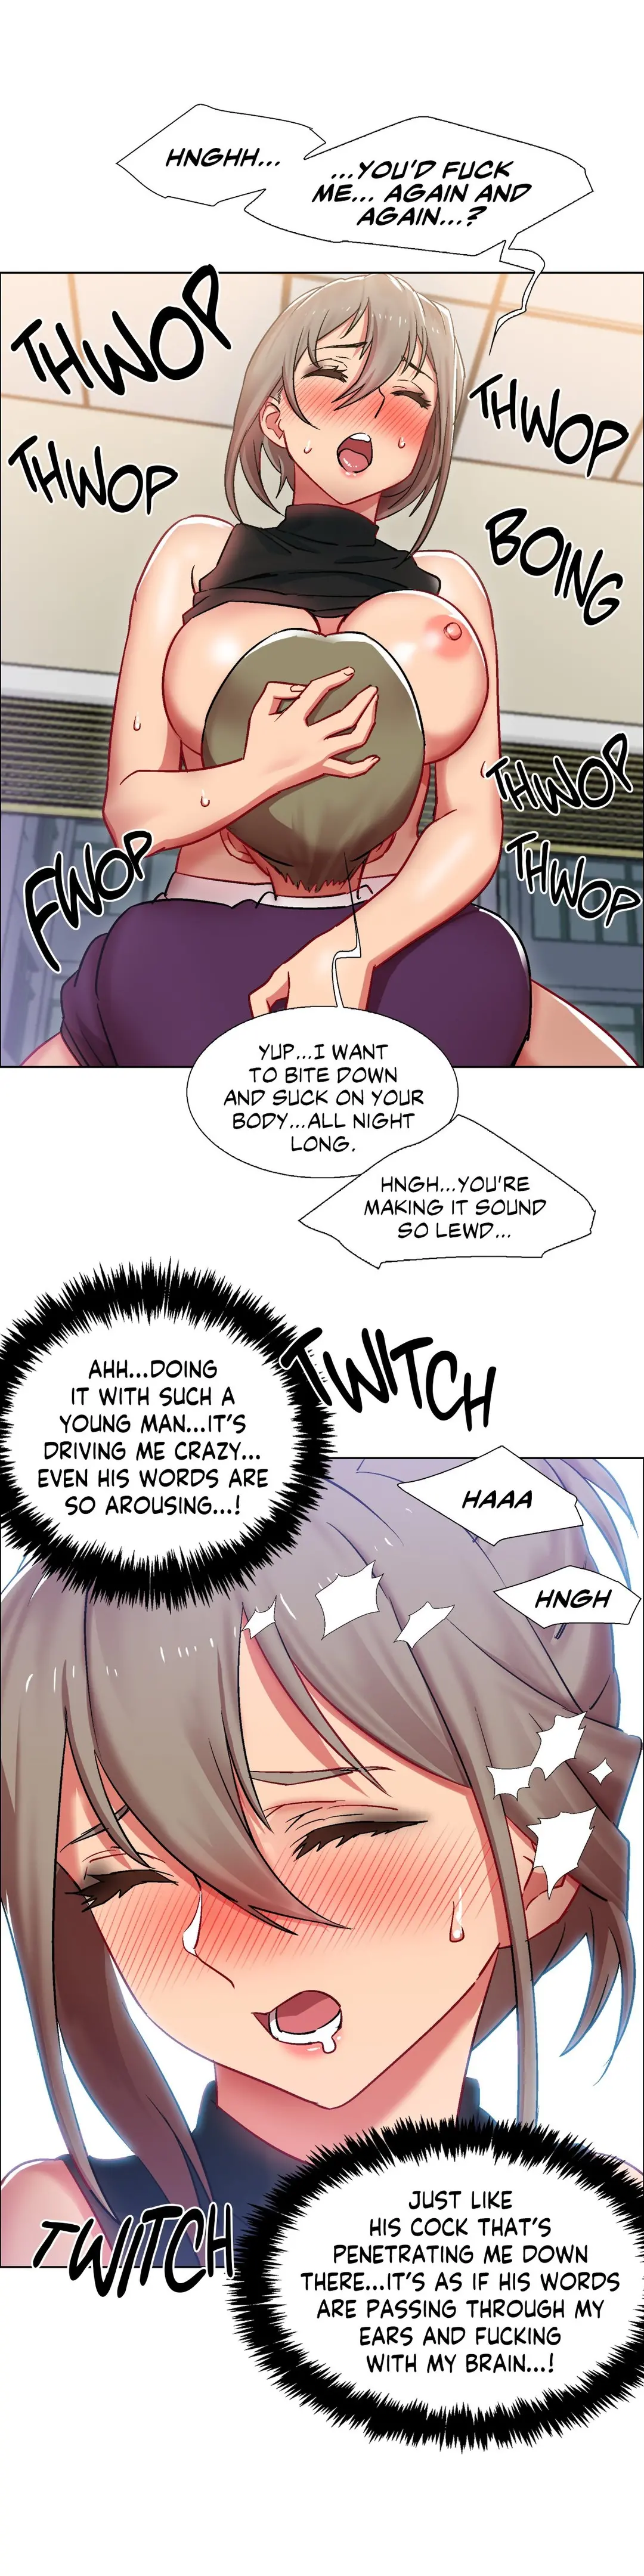 Rental Girls - Chapter 13 Page 3